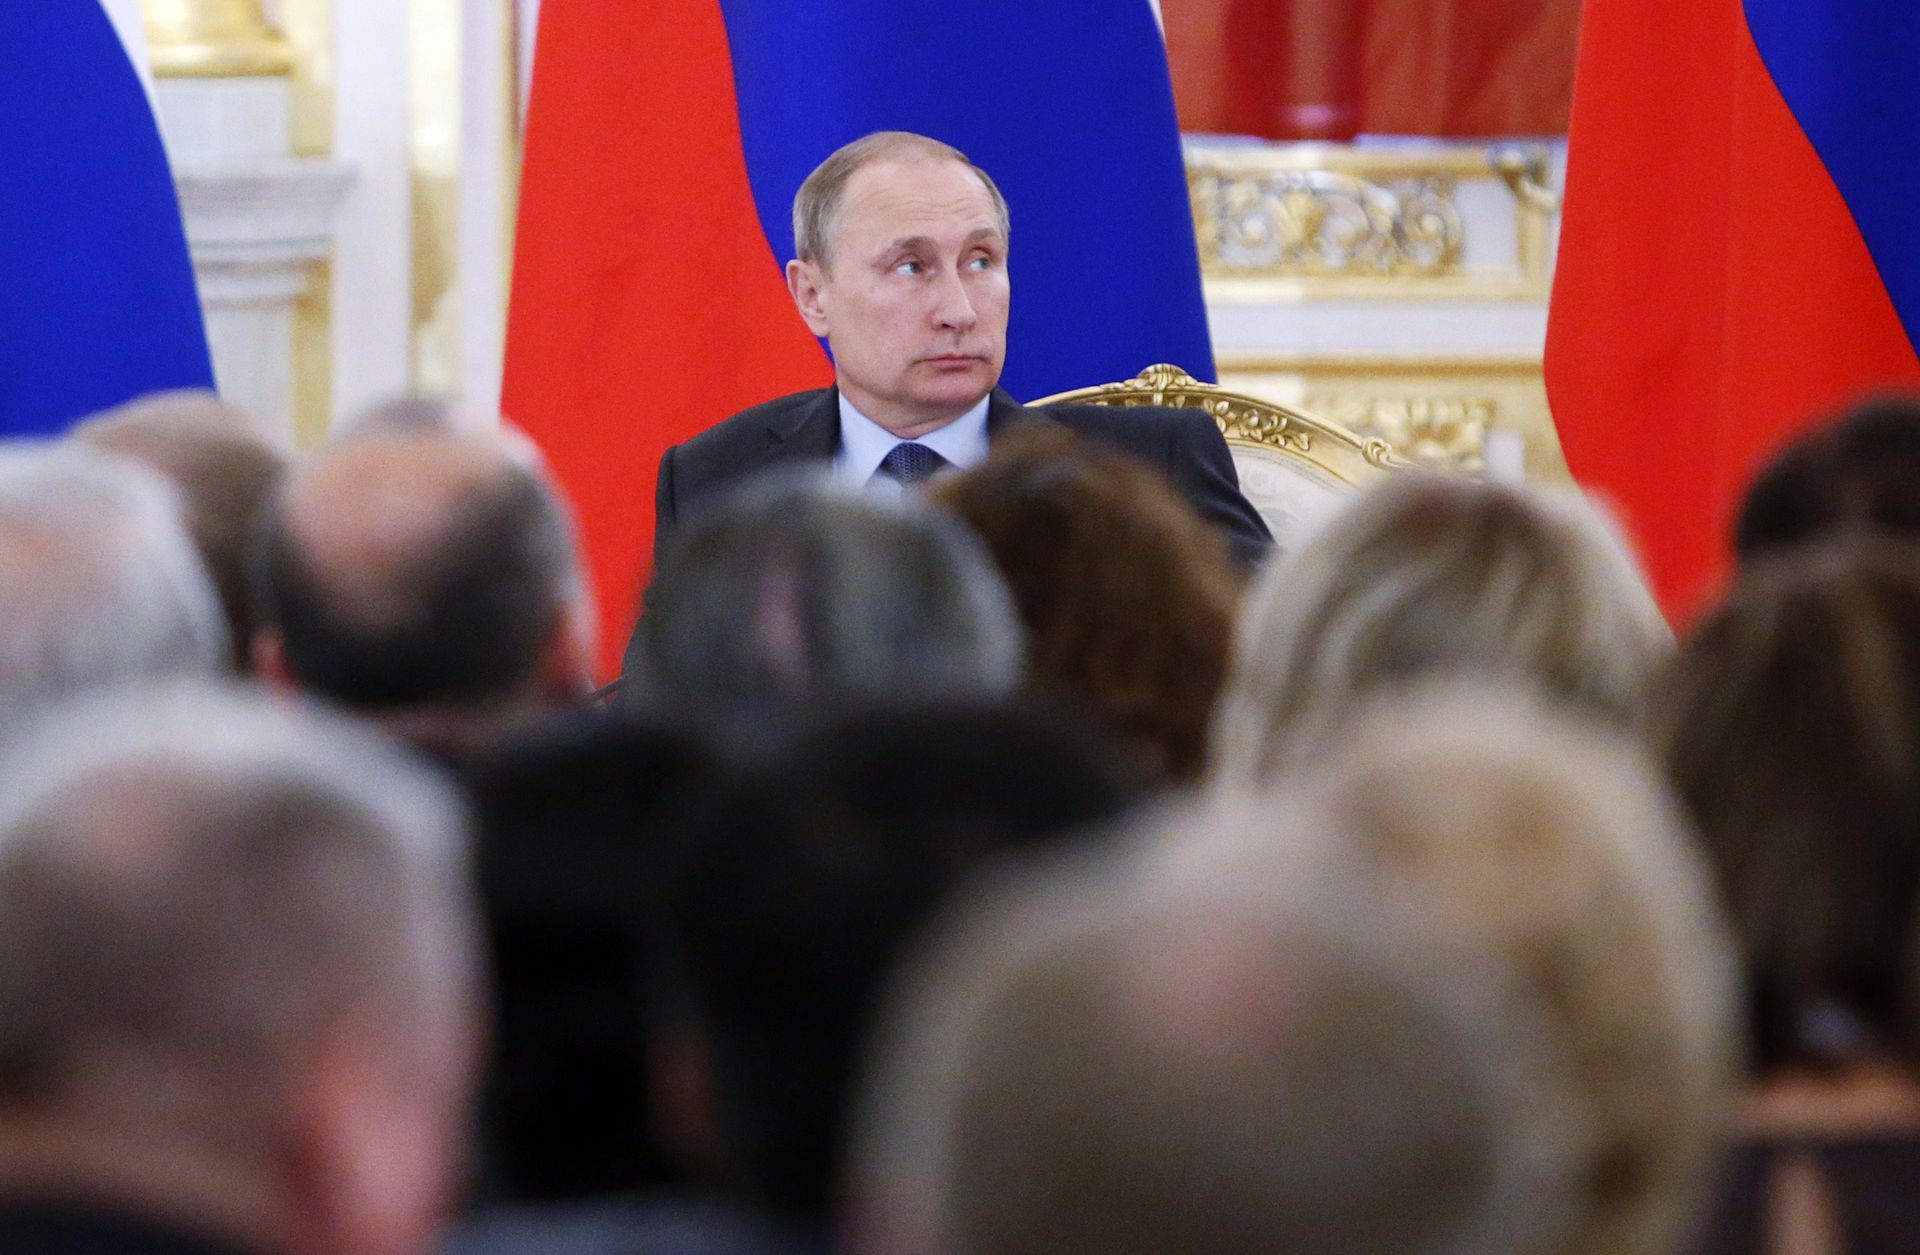 Russian President Vladimir Putin attends a session at the Kremlin in Moscow on June 23.